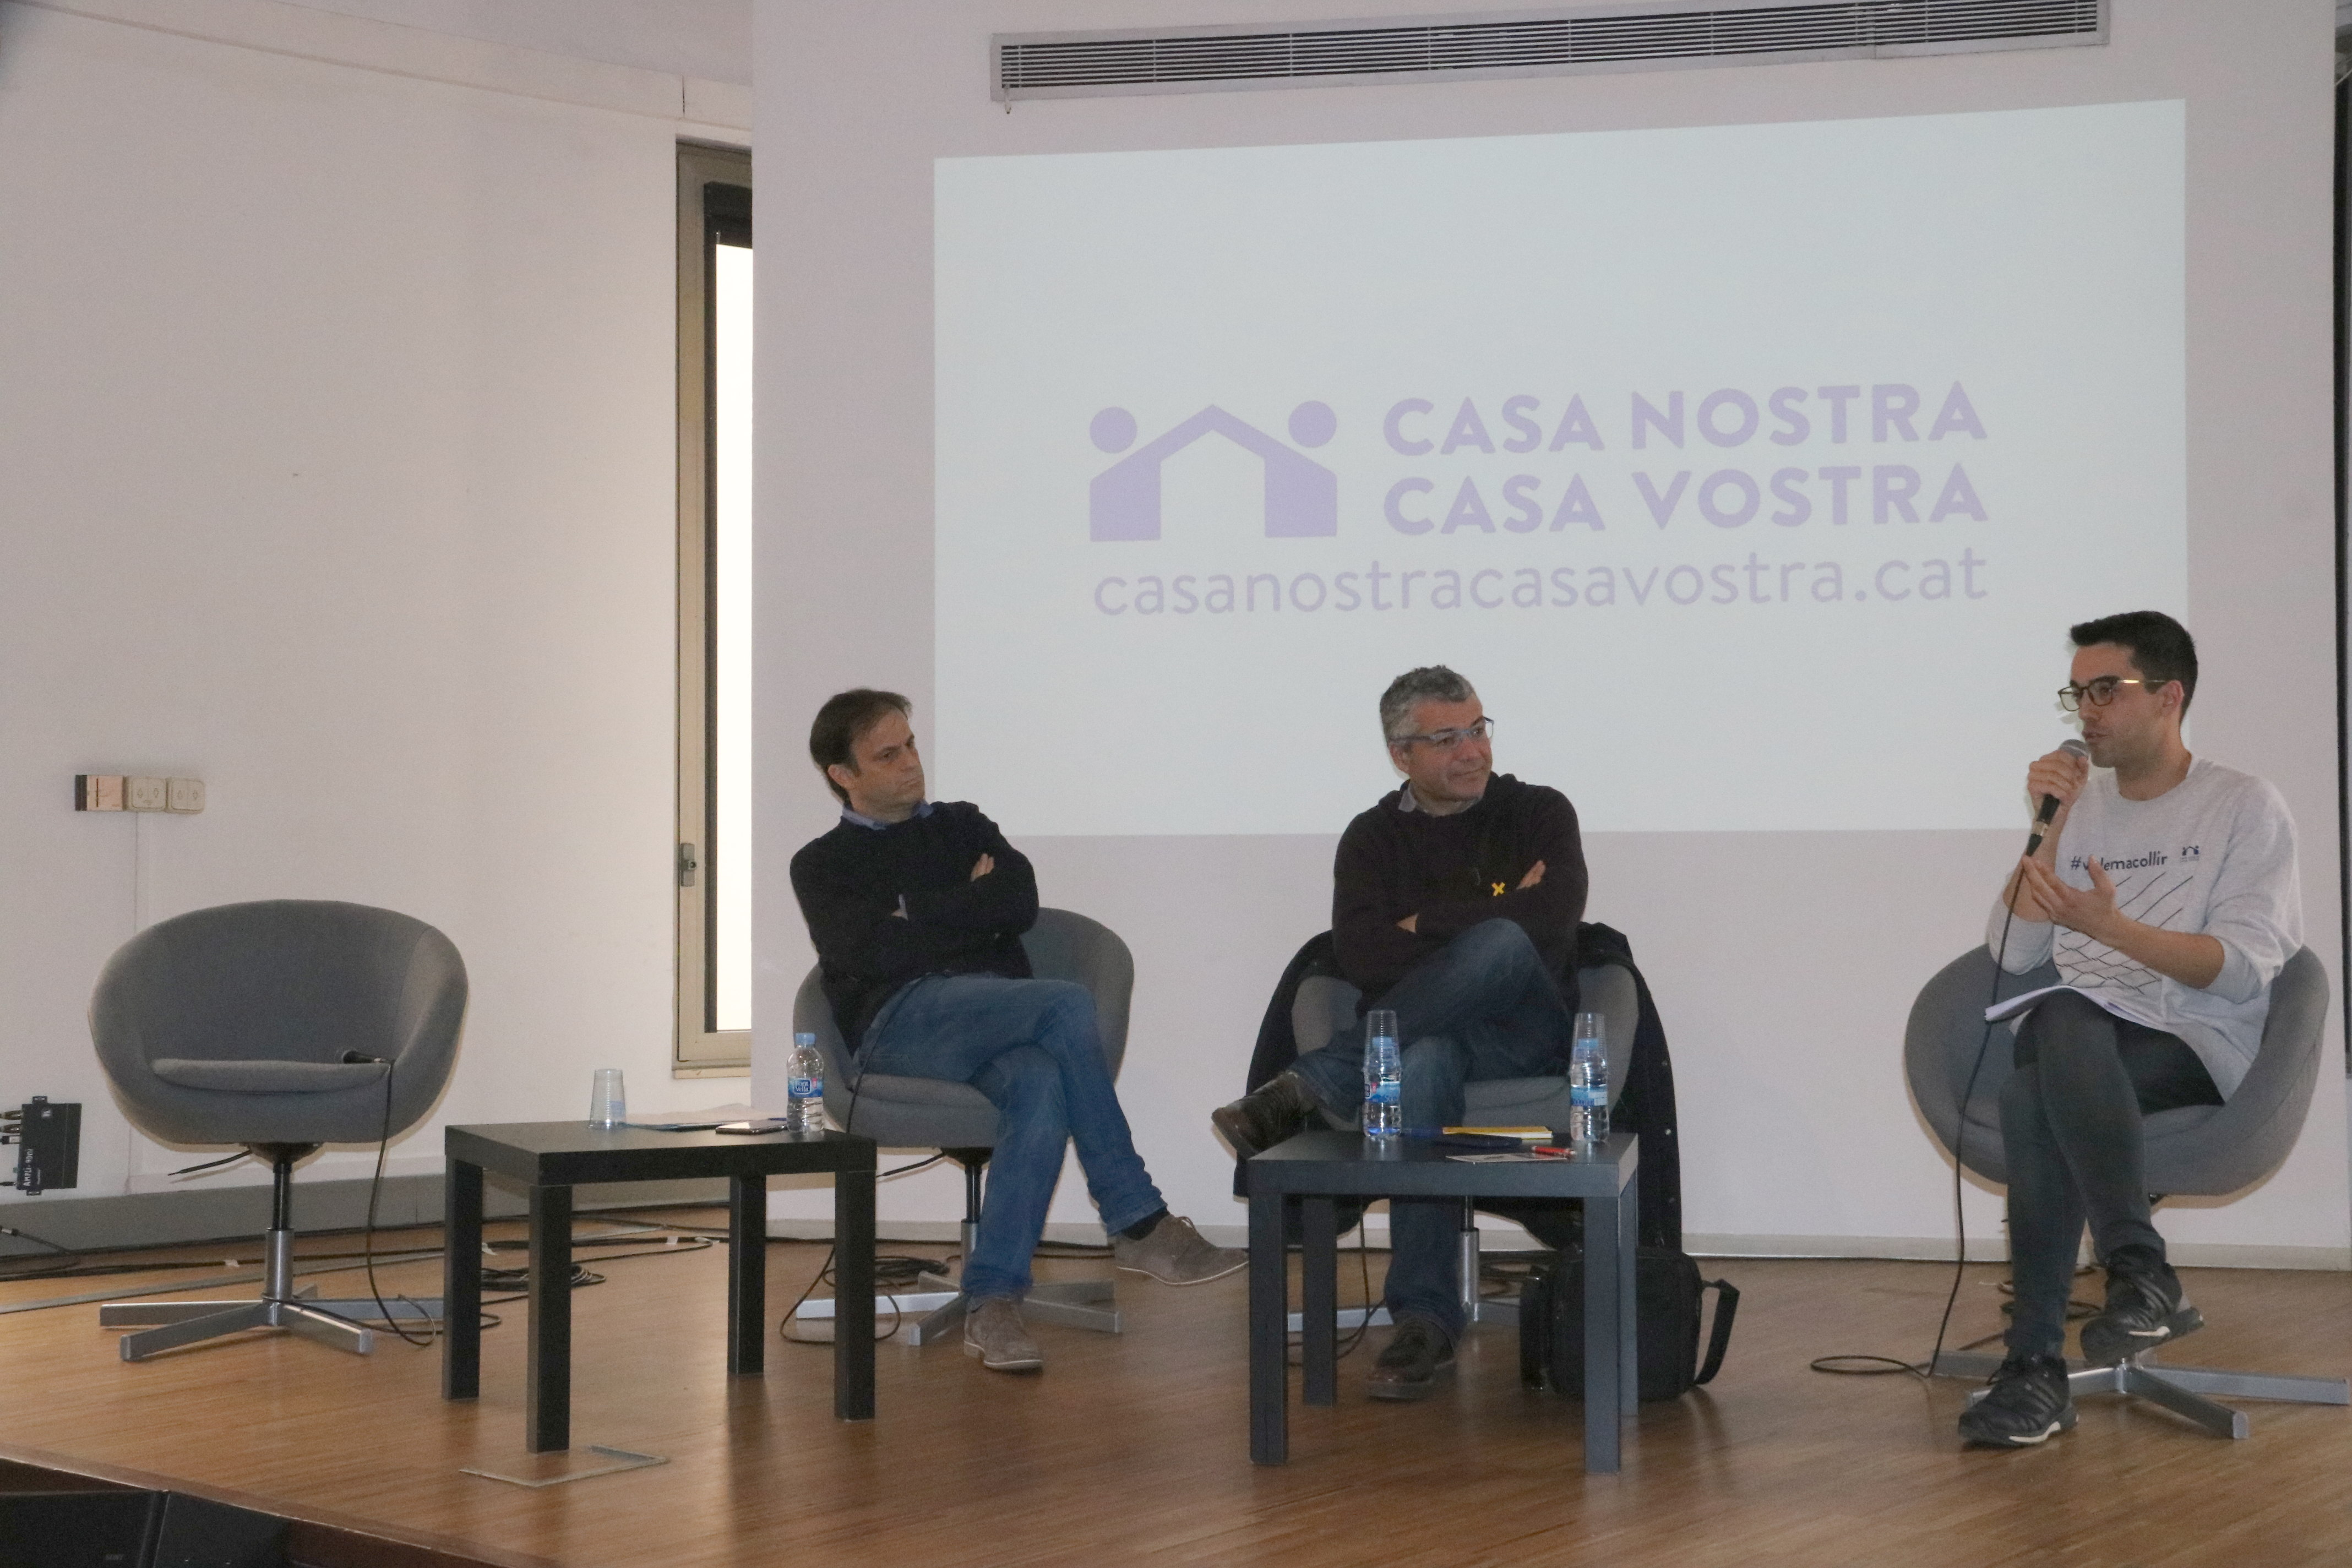 Jaume Asens and Oriol Amorós in a talk from 'Casa Nostra, Casa Vostra' on February 18 2018. On the left, a vacant chair that was reserved for a representative of the Spanish government (by Júlia Pérez)